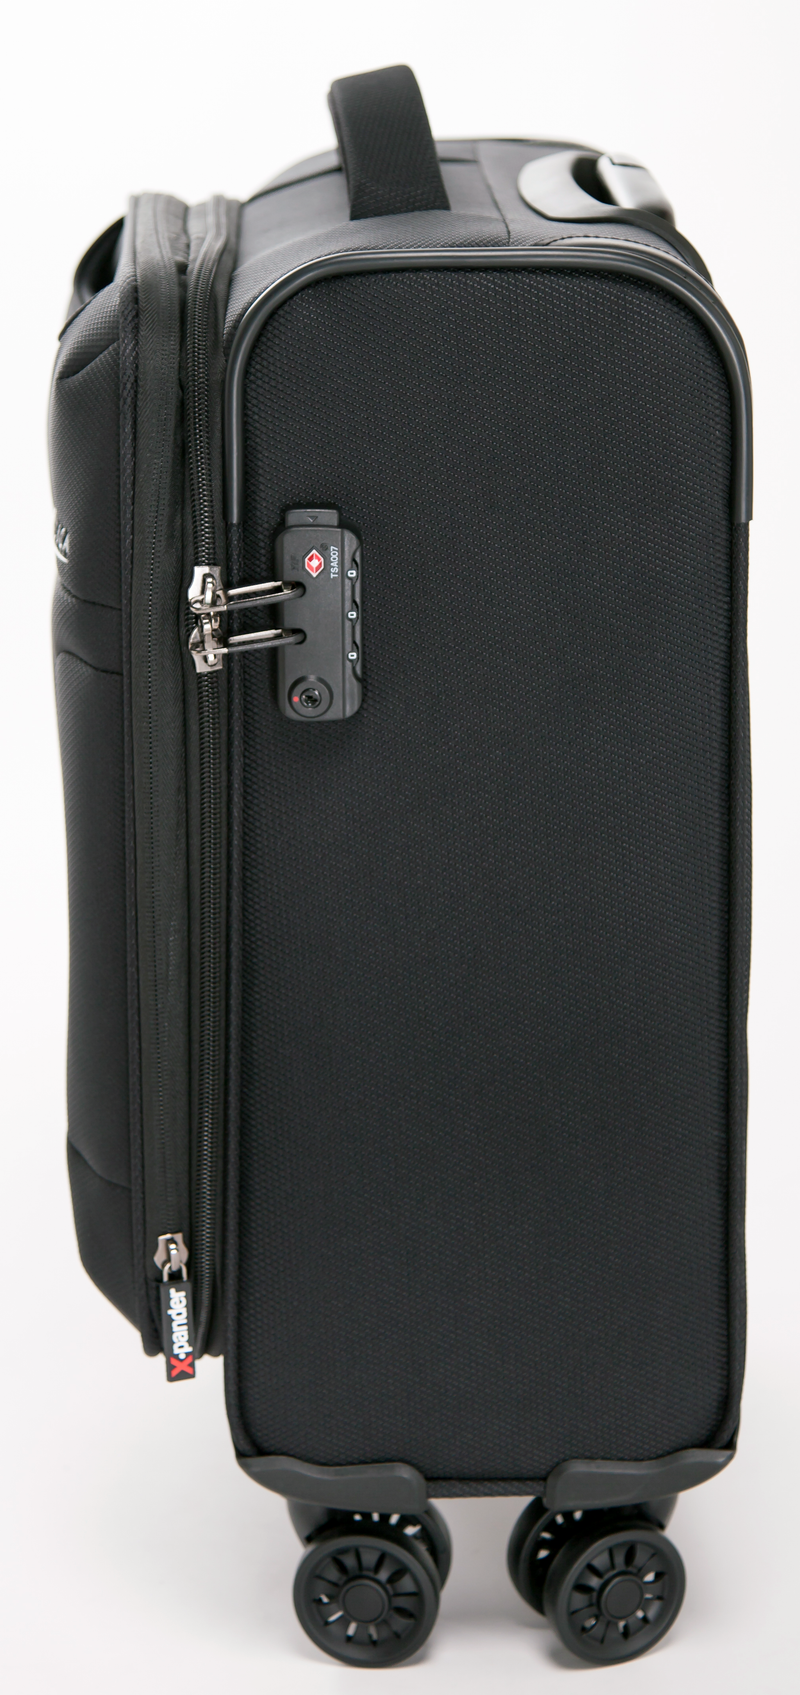 Tosca So-Lite carry-on Black luxury light weight 53cm-H Trolley luggage AIR4044C